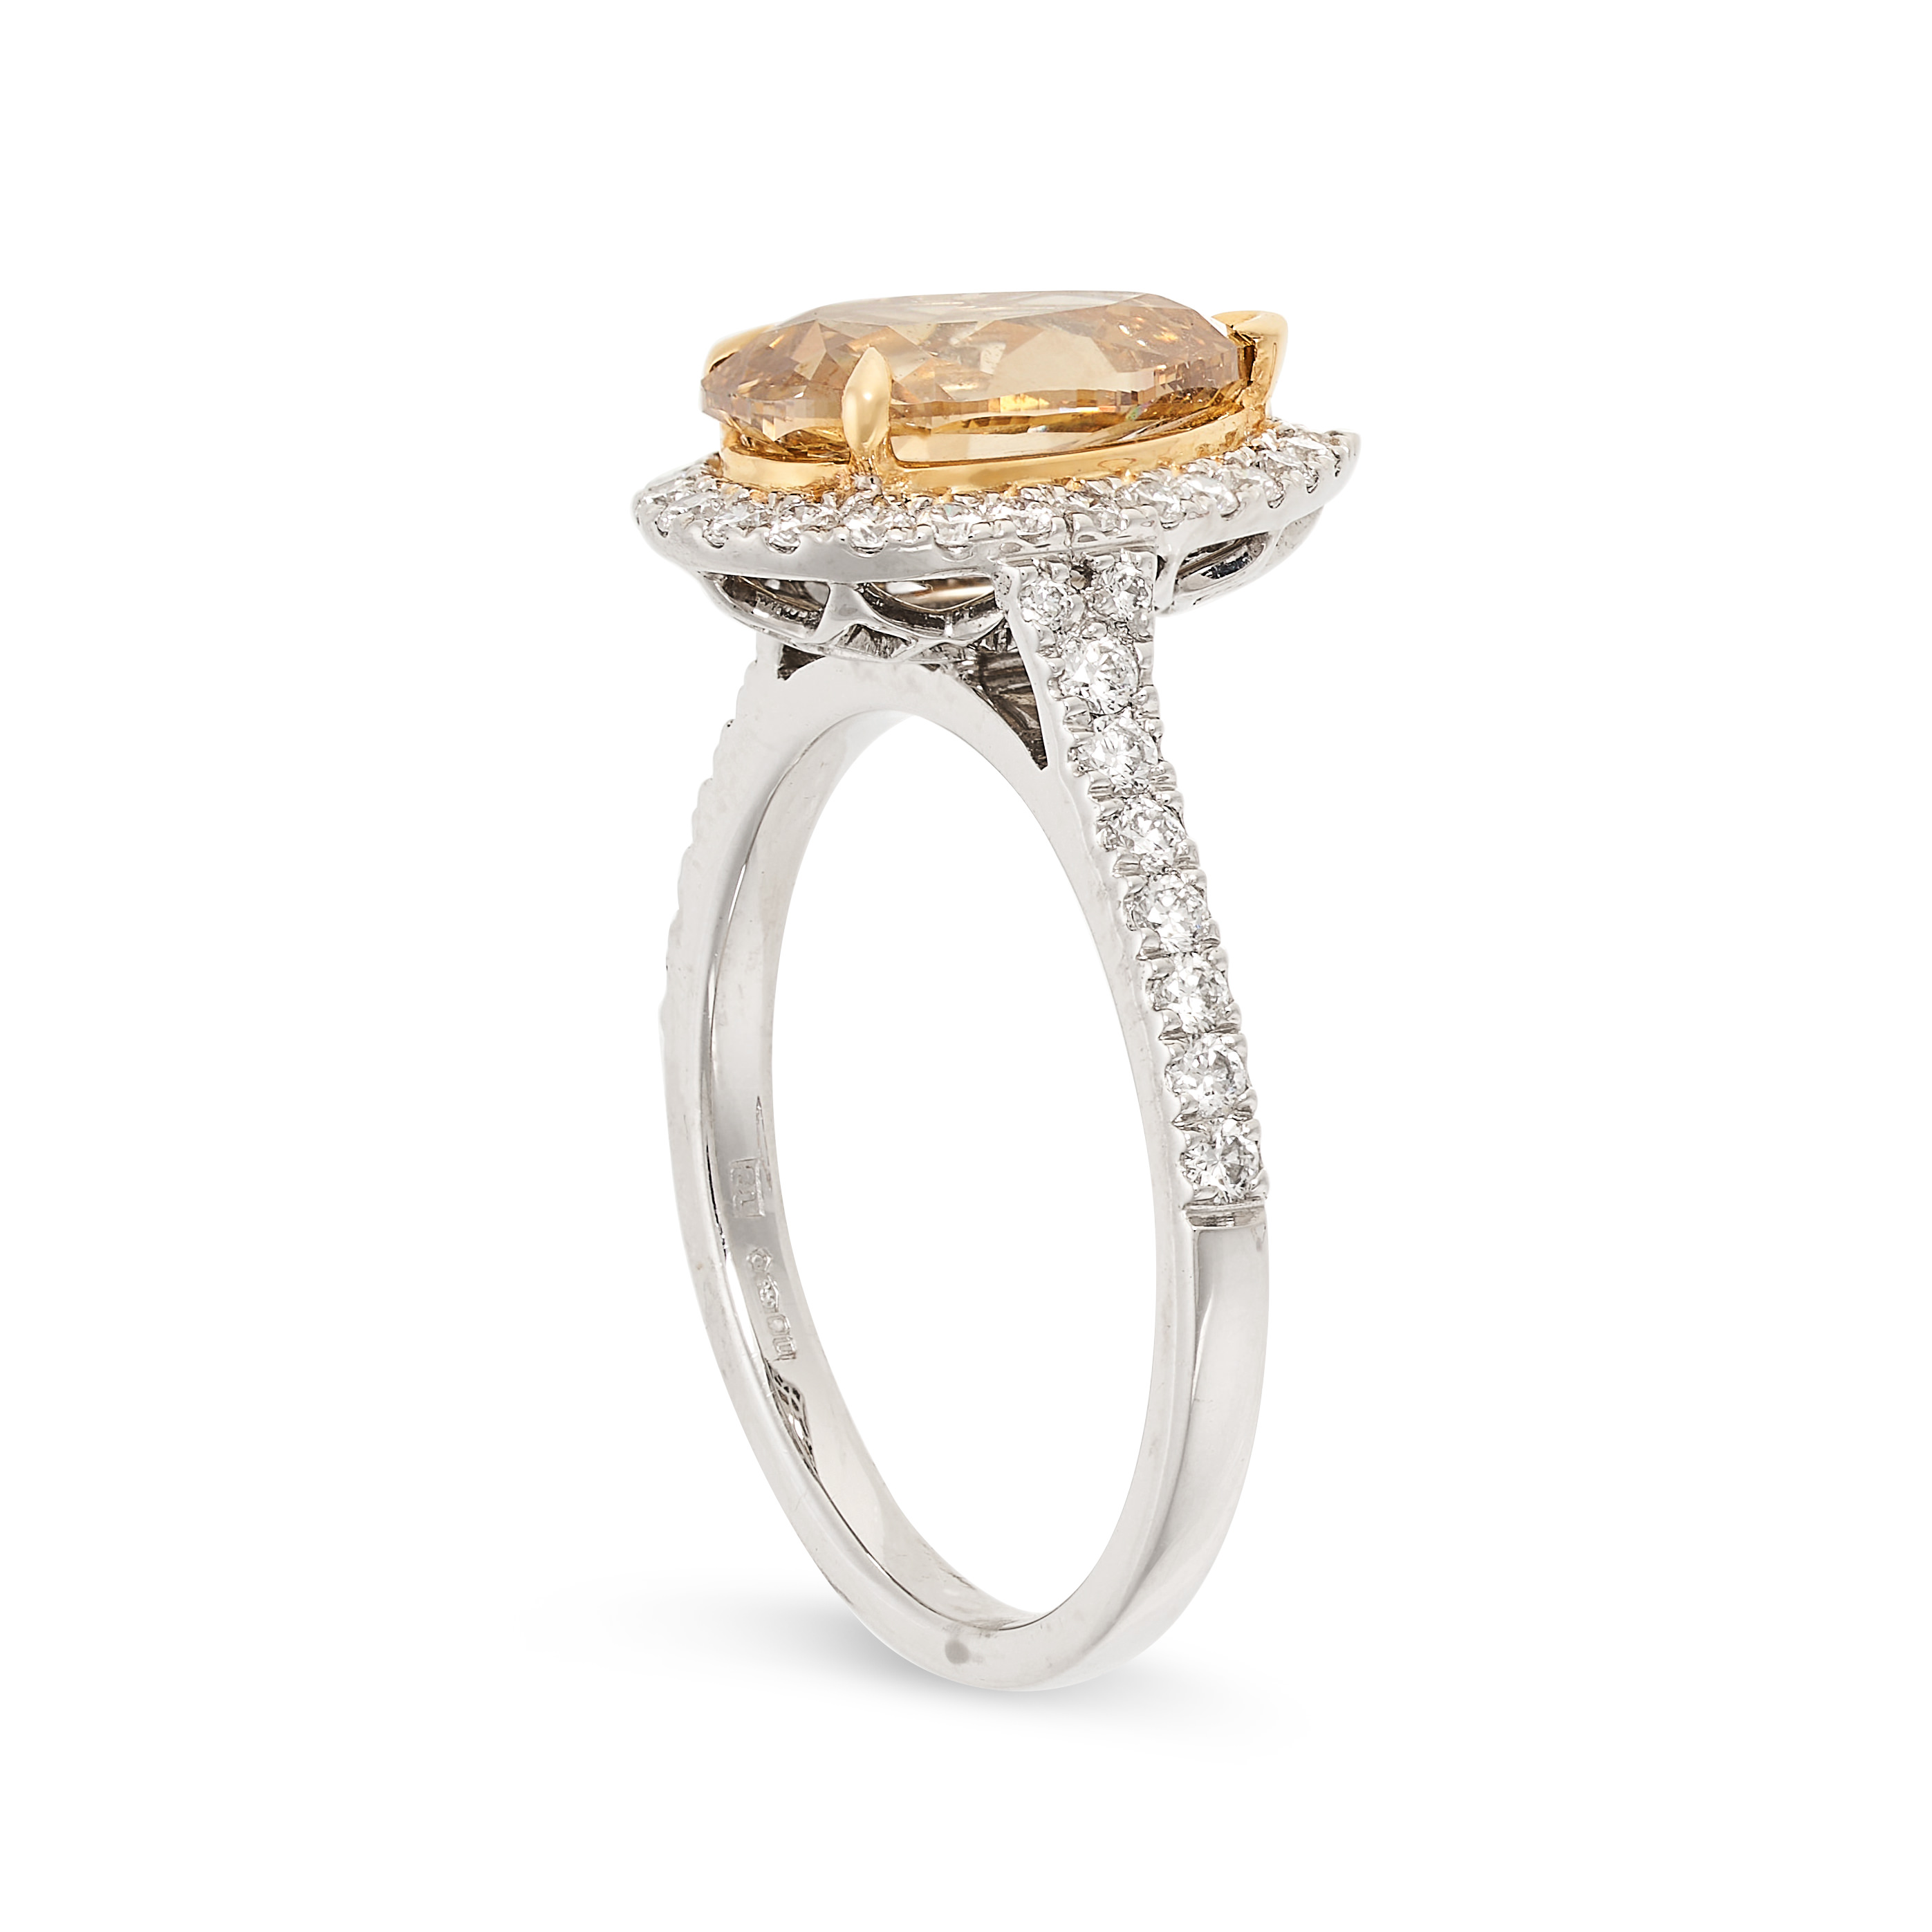 A FANCY COLOURED DIAMOND RING in platinum, set with a pear cut champagne diamond of 2.20 carats in a - Image 2 of 2